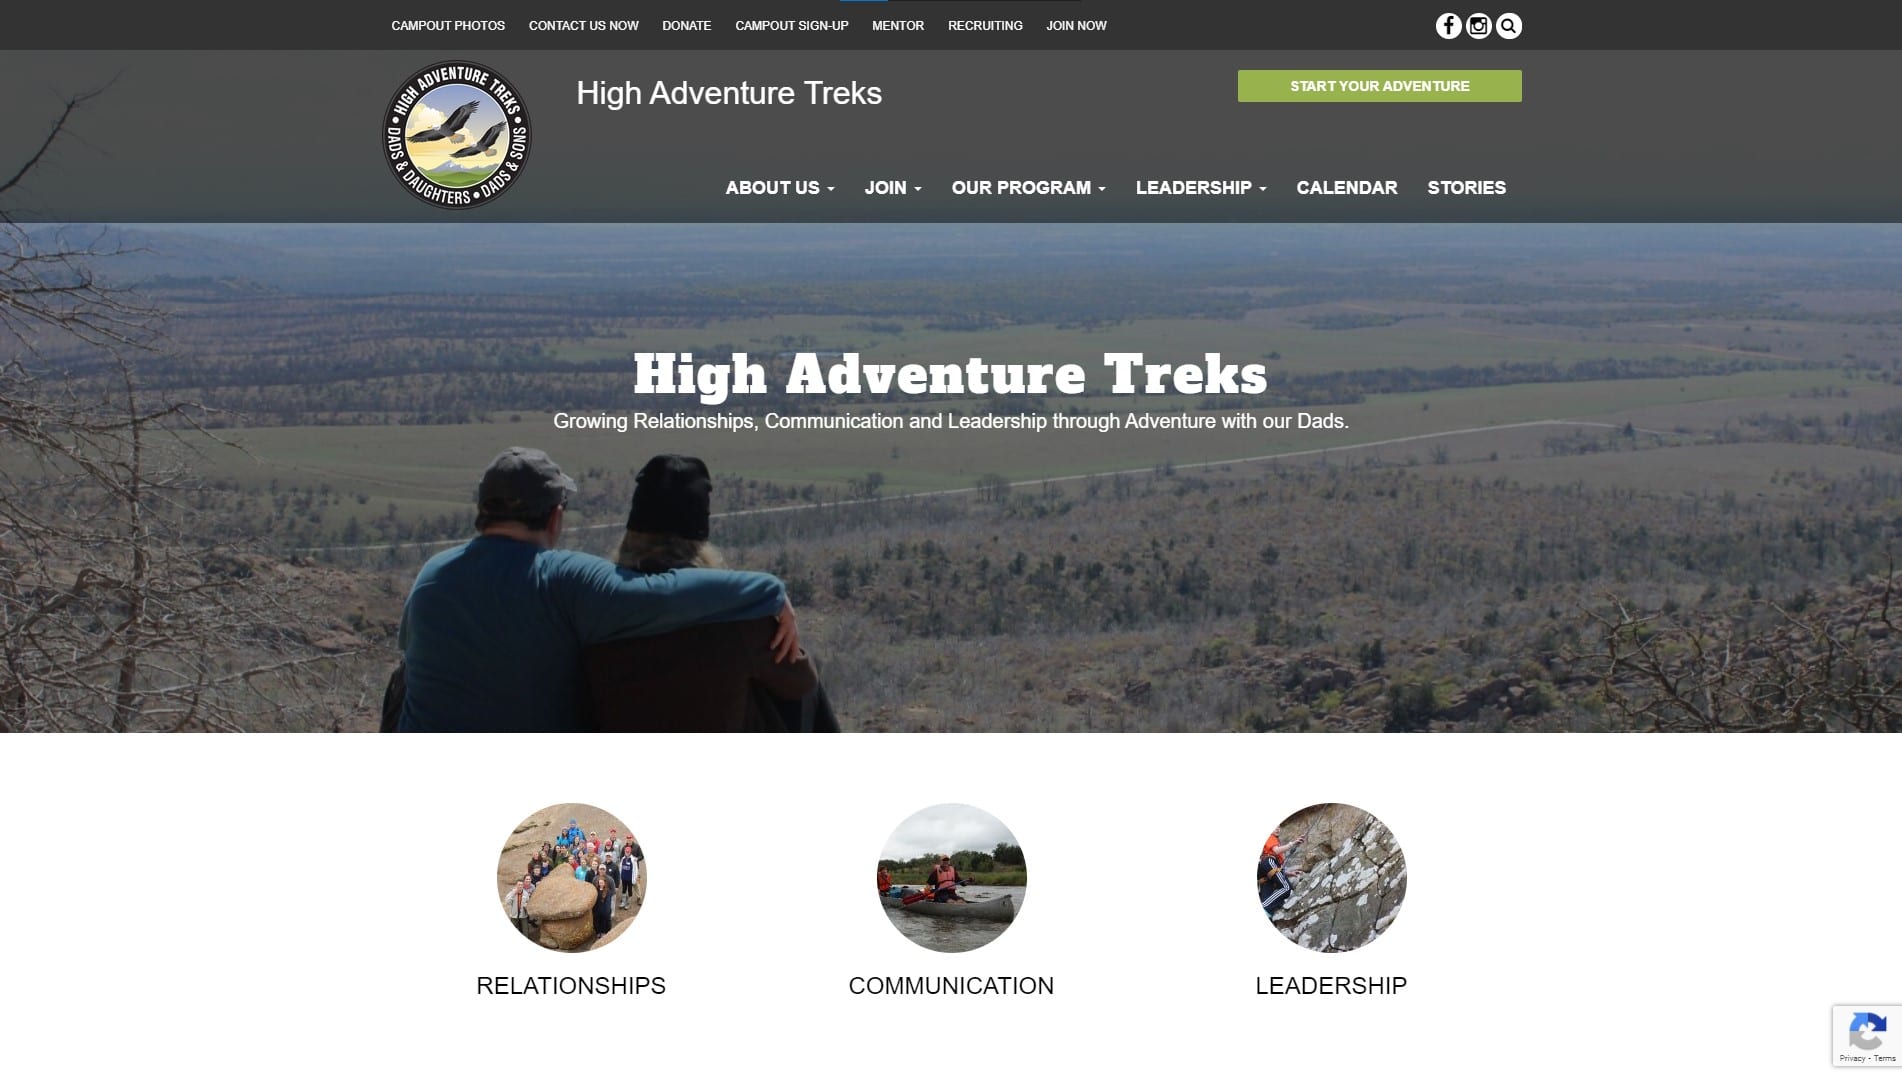 How High Adventure Treks Now Attracts a New Generation With their New Website